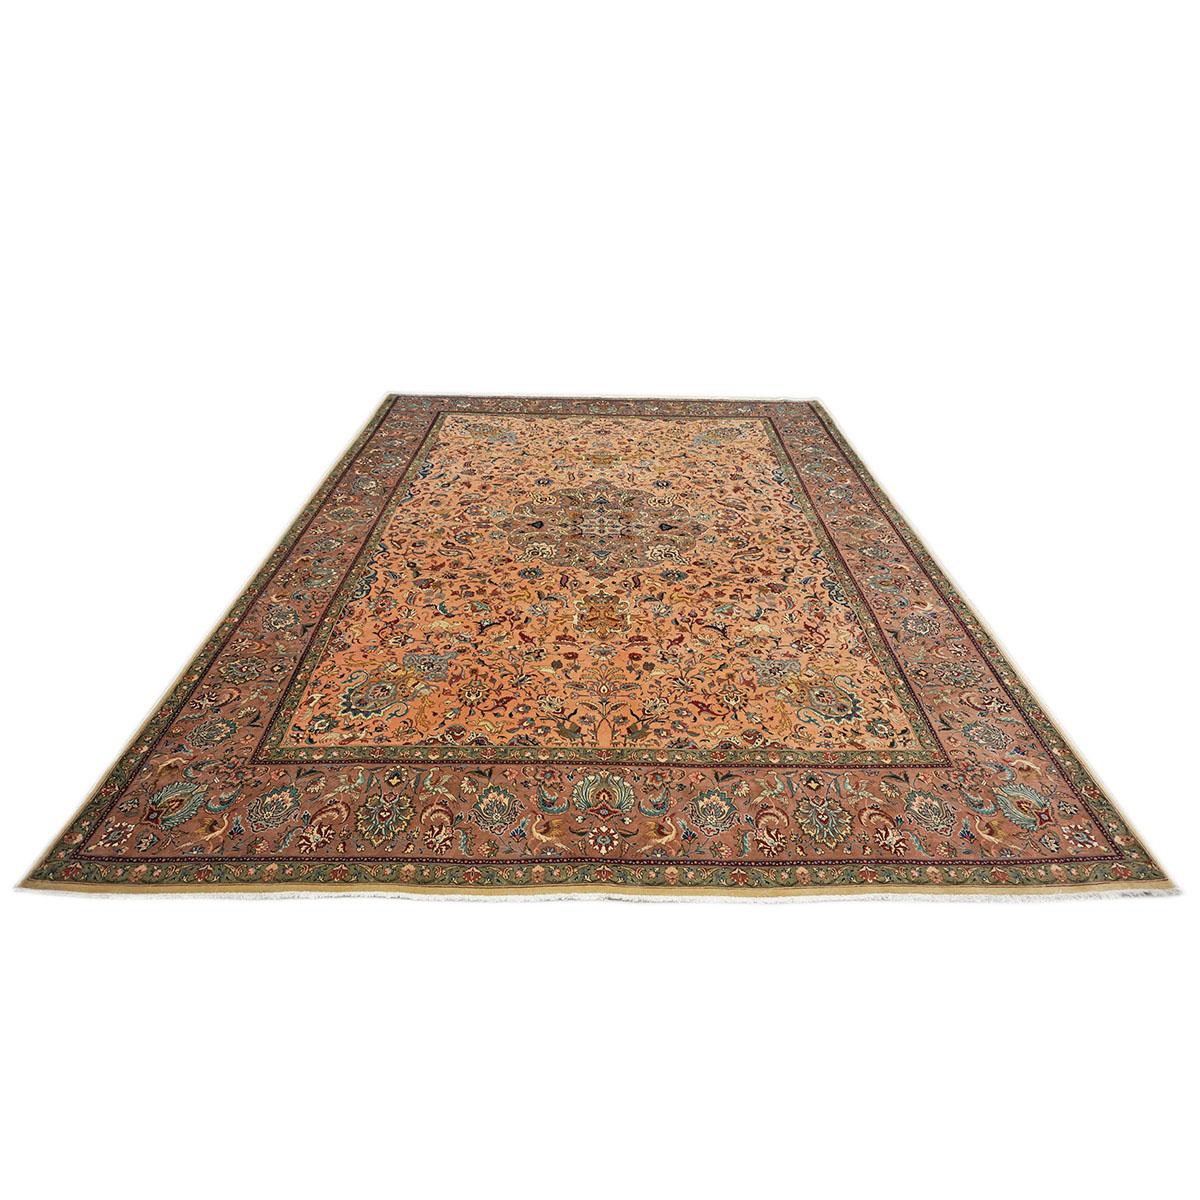 Mid-20th Century Antique 1930s Persian Tabriz Pahlavi 9X13 Salmon Pink & Nutmeg Brown Area Rug For Sale